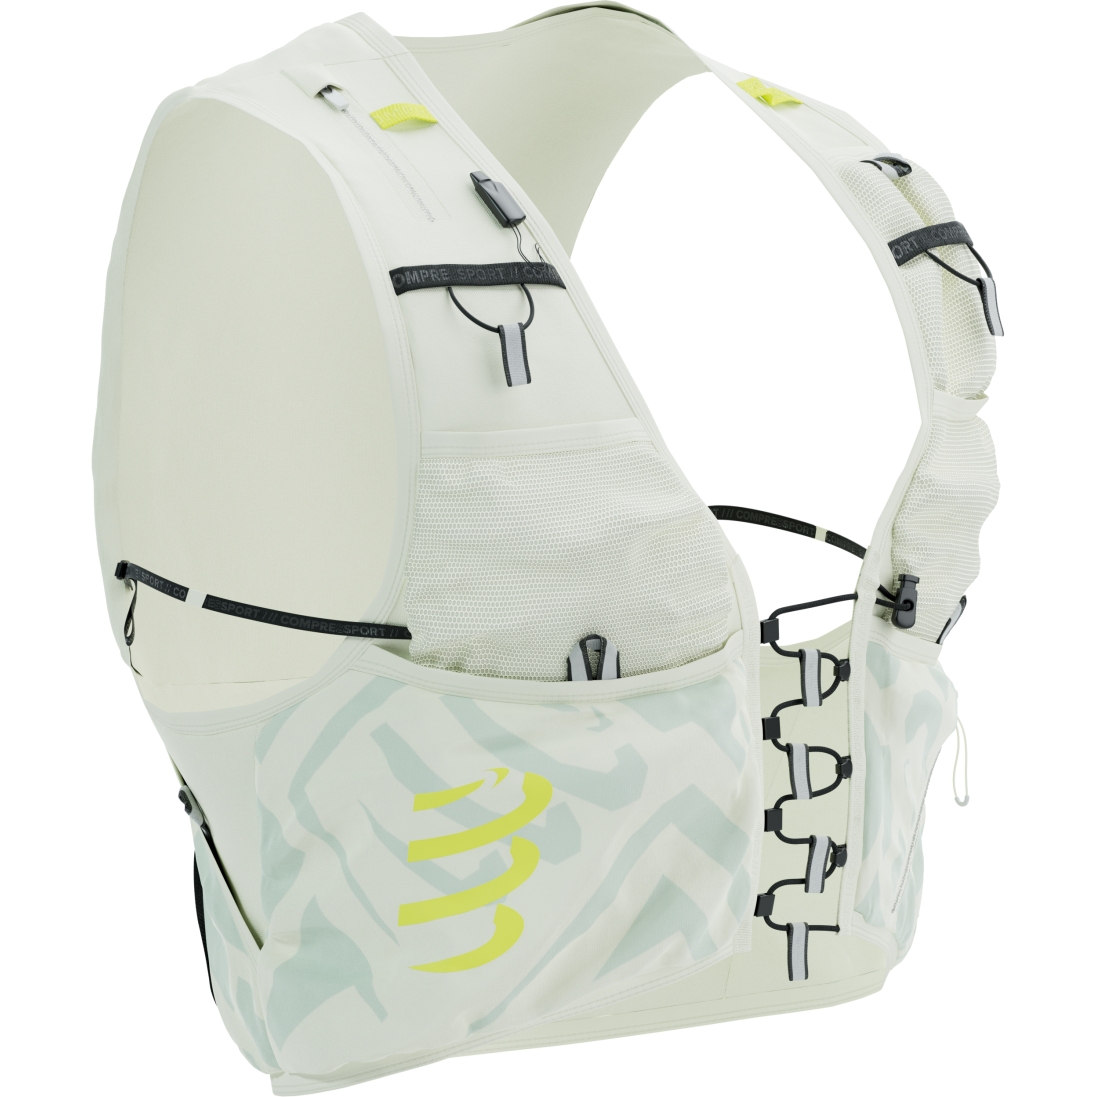 Picture of Compressport UltRun S Pack Evo 10L Hydration Backpack - sugar swizzle/ice flow/safety yellow